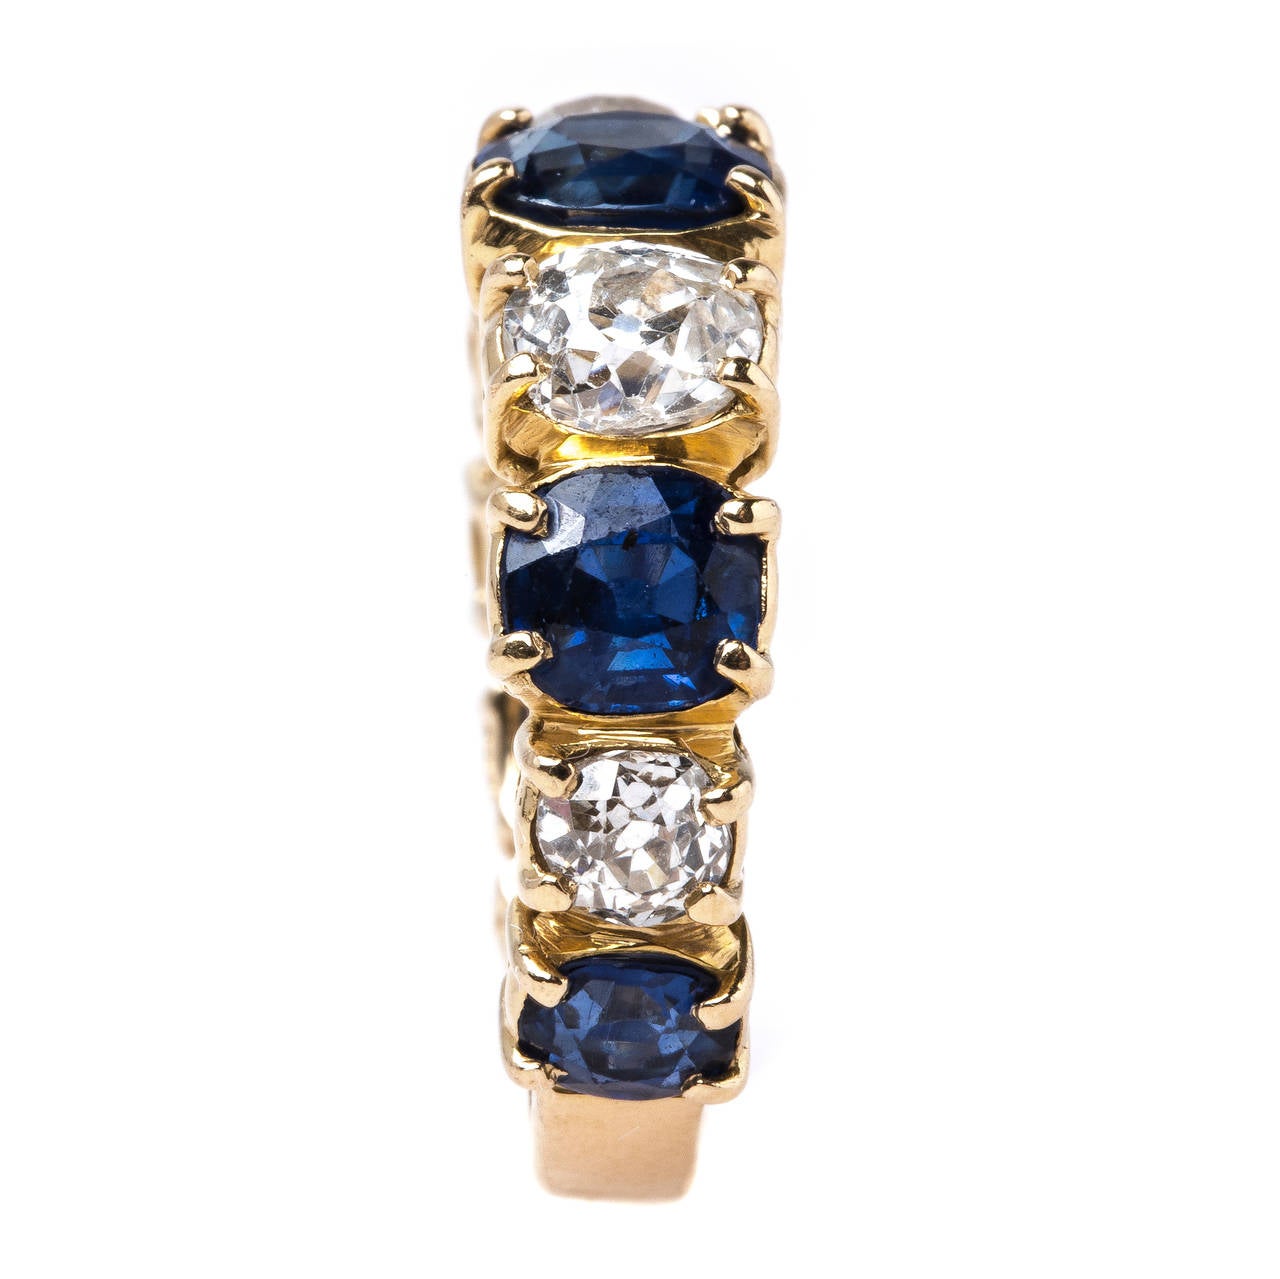 Bridlington is an amazing one-of-a-kind Victorian era (circa 1900) 18k yellow gold sapphire and diamond band. The ring features five prong set Cushion Cut natural sapphires totaling approximately 2.30ct accompanied by a Guild Laboratories